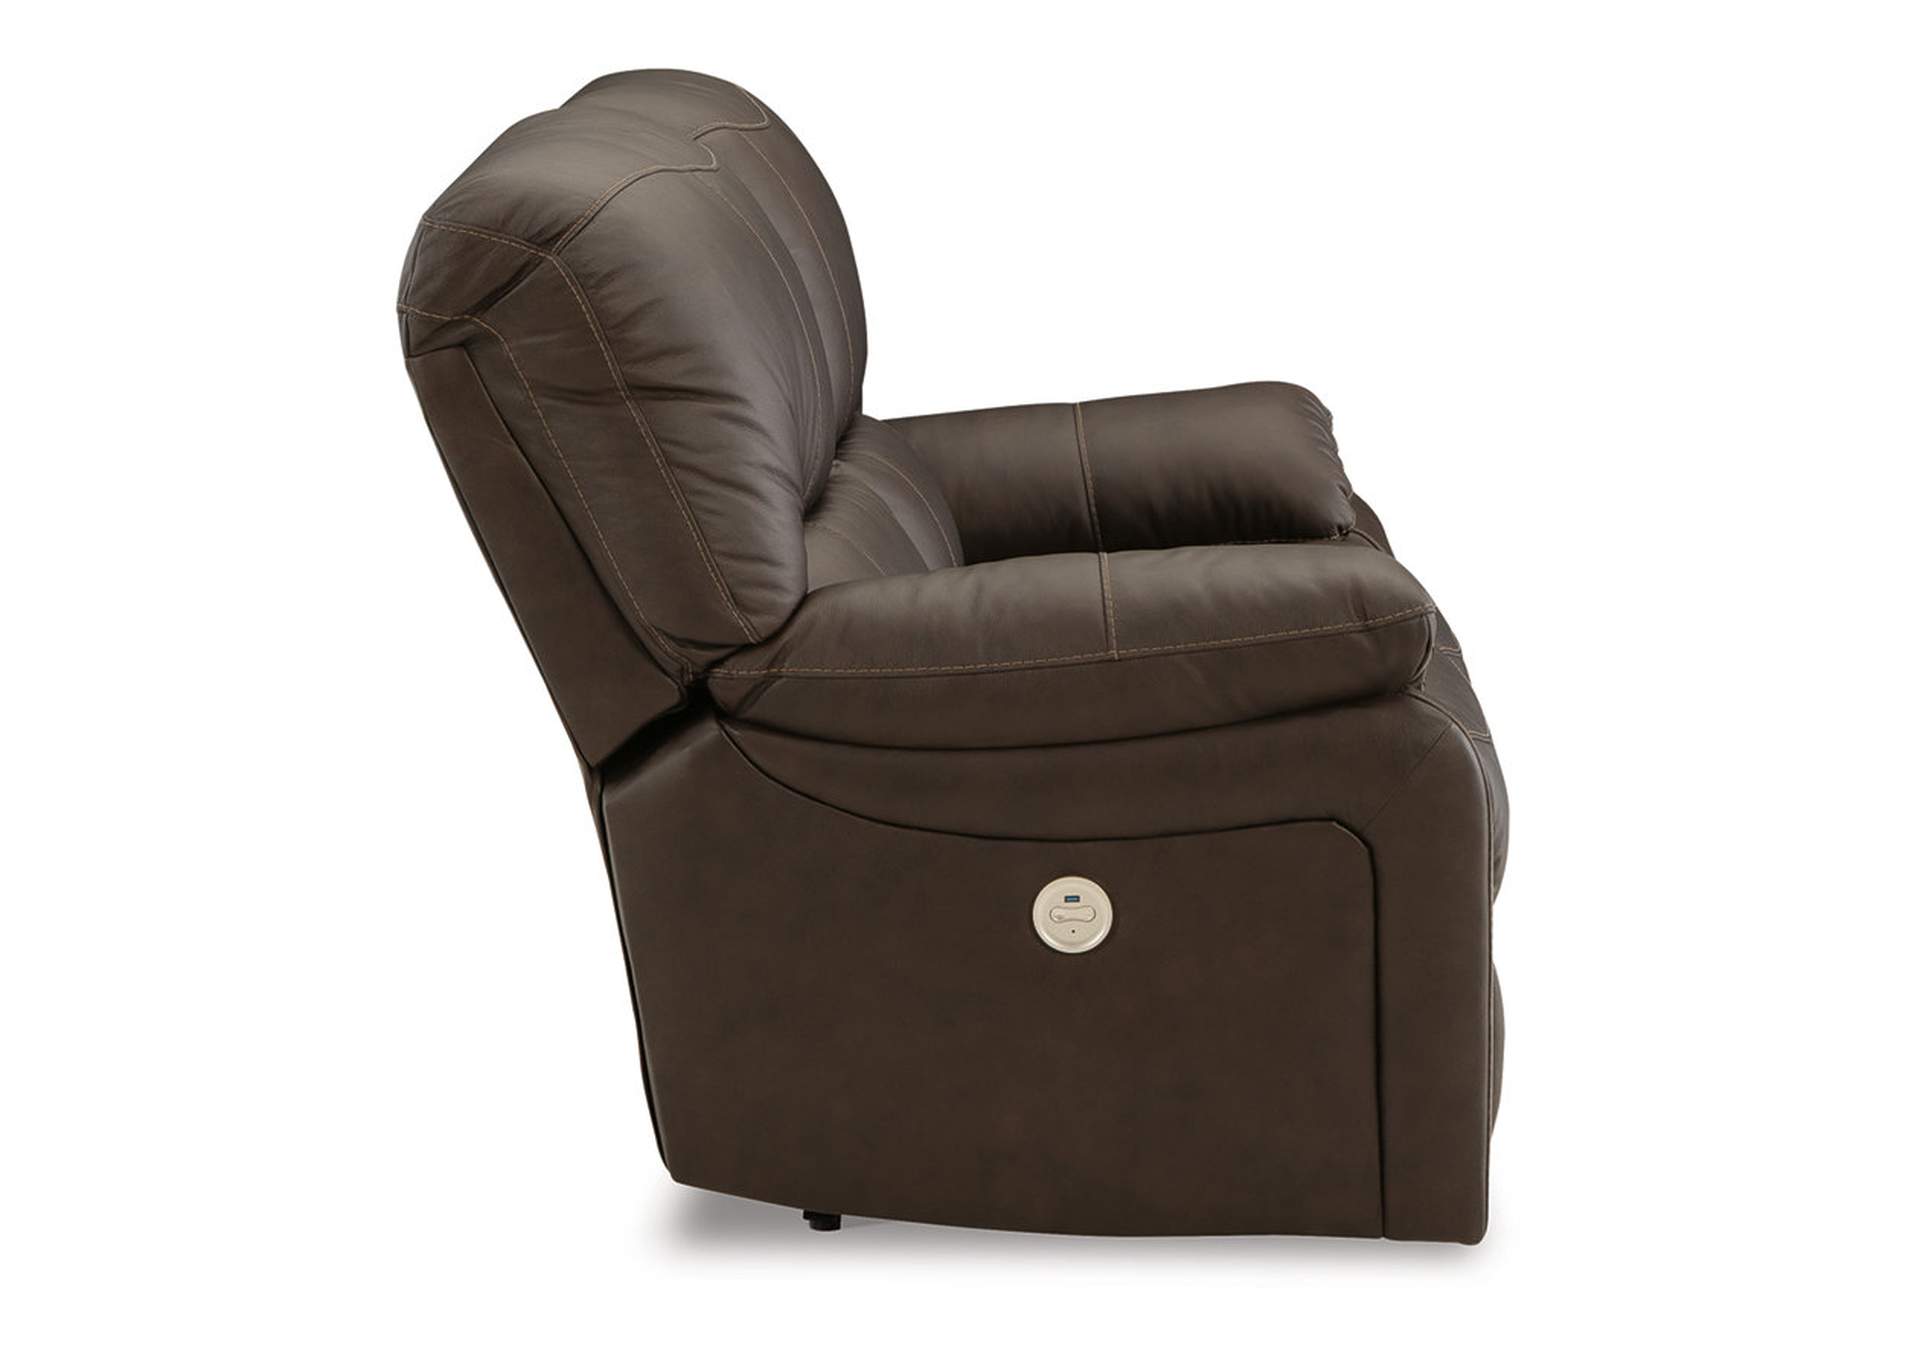 Leesworth Power Reclining Sofa, Loveseat and Recliner,Signature Design By Ashley